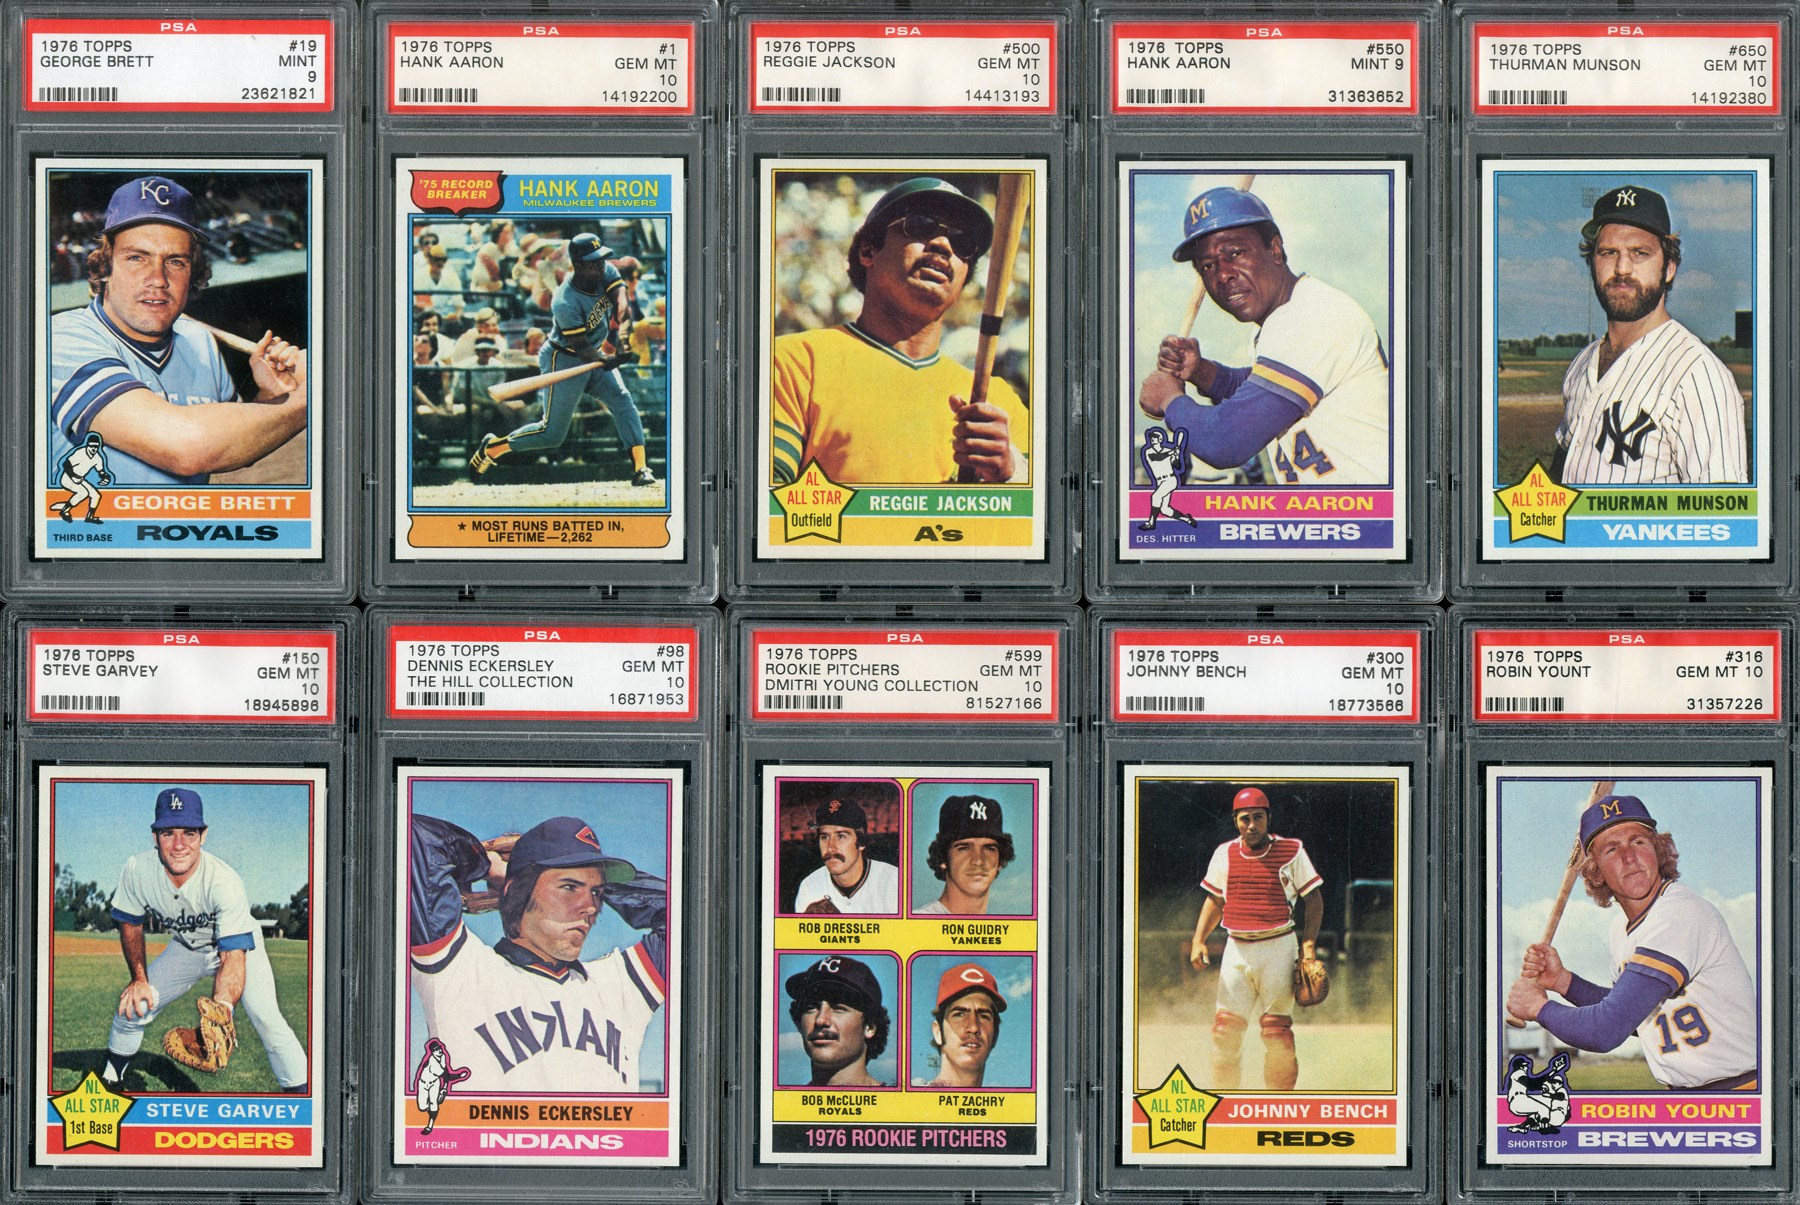 Baseball and Trading Cards - All-Time Greatest 1976 Topps Baseball Complete Graded Set - #1 on PSA Registry (9.83 GPA)